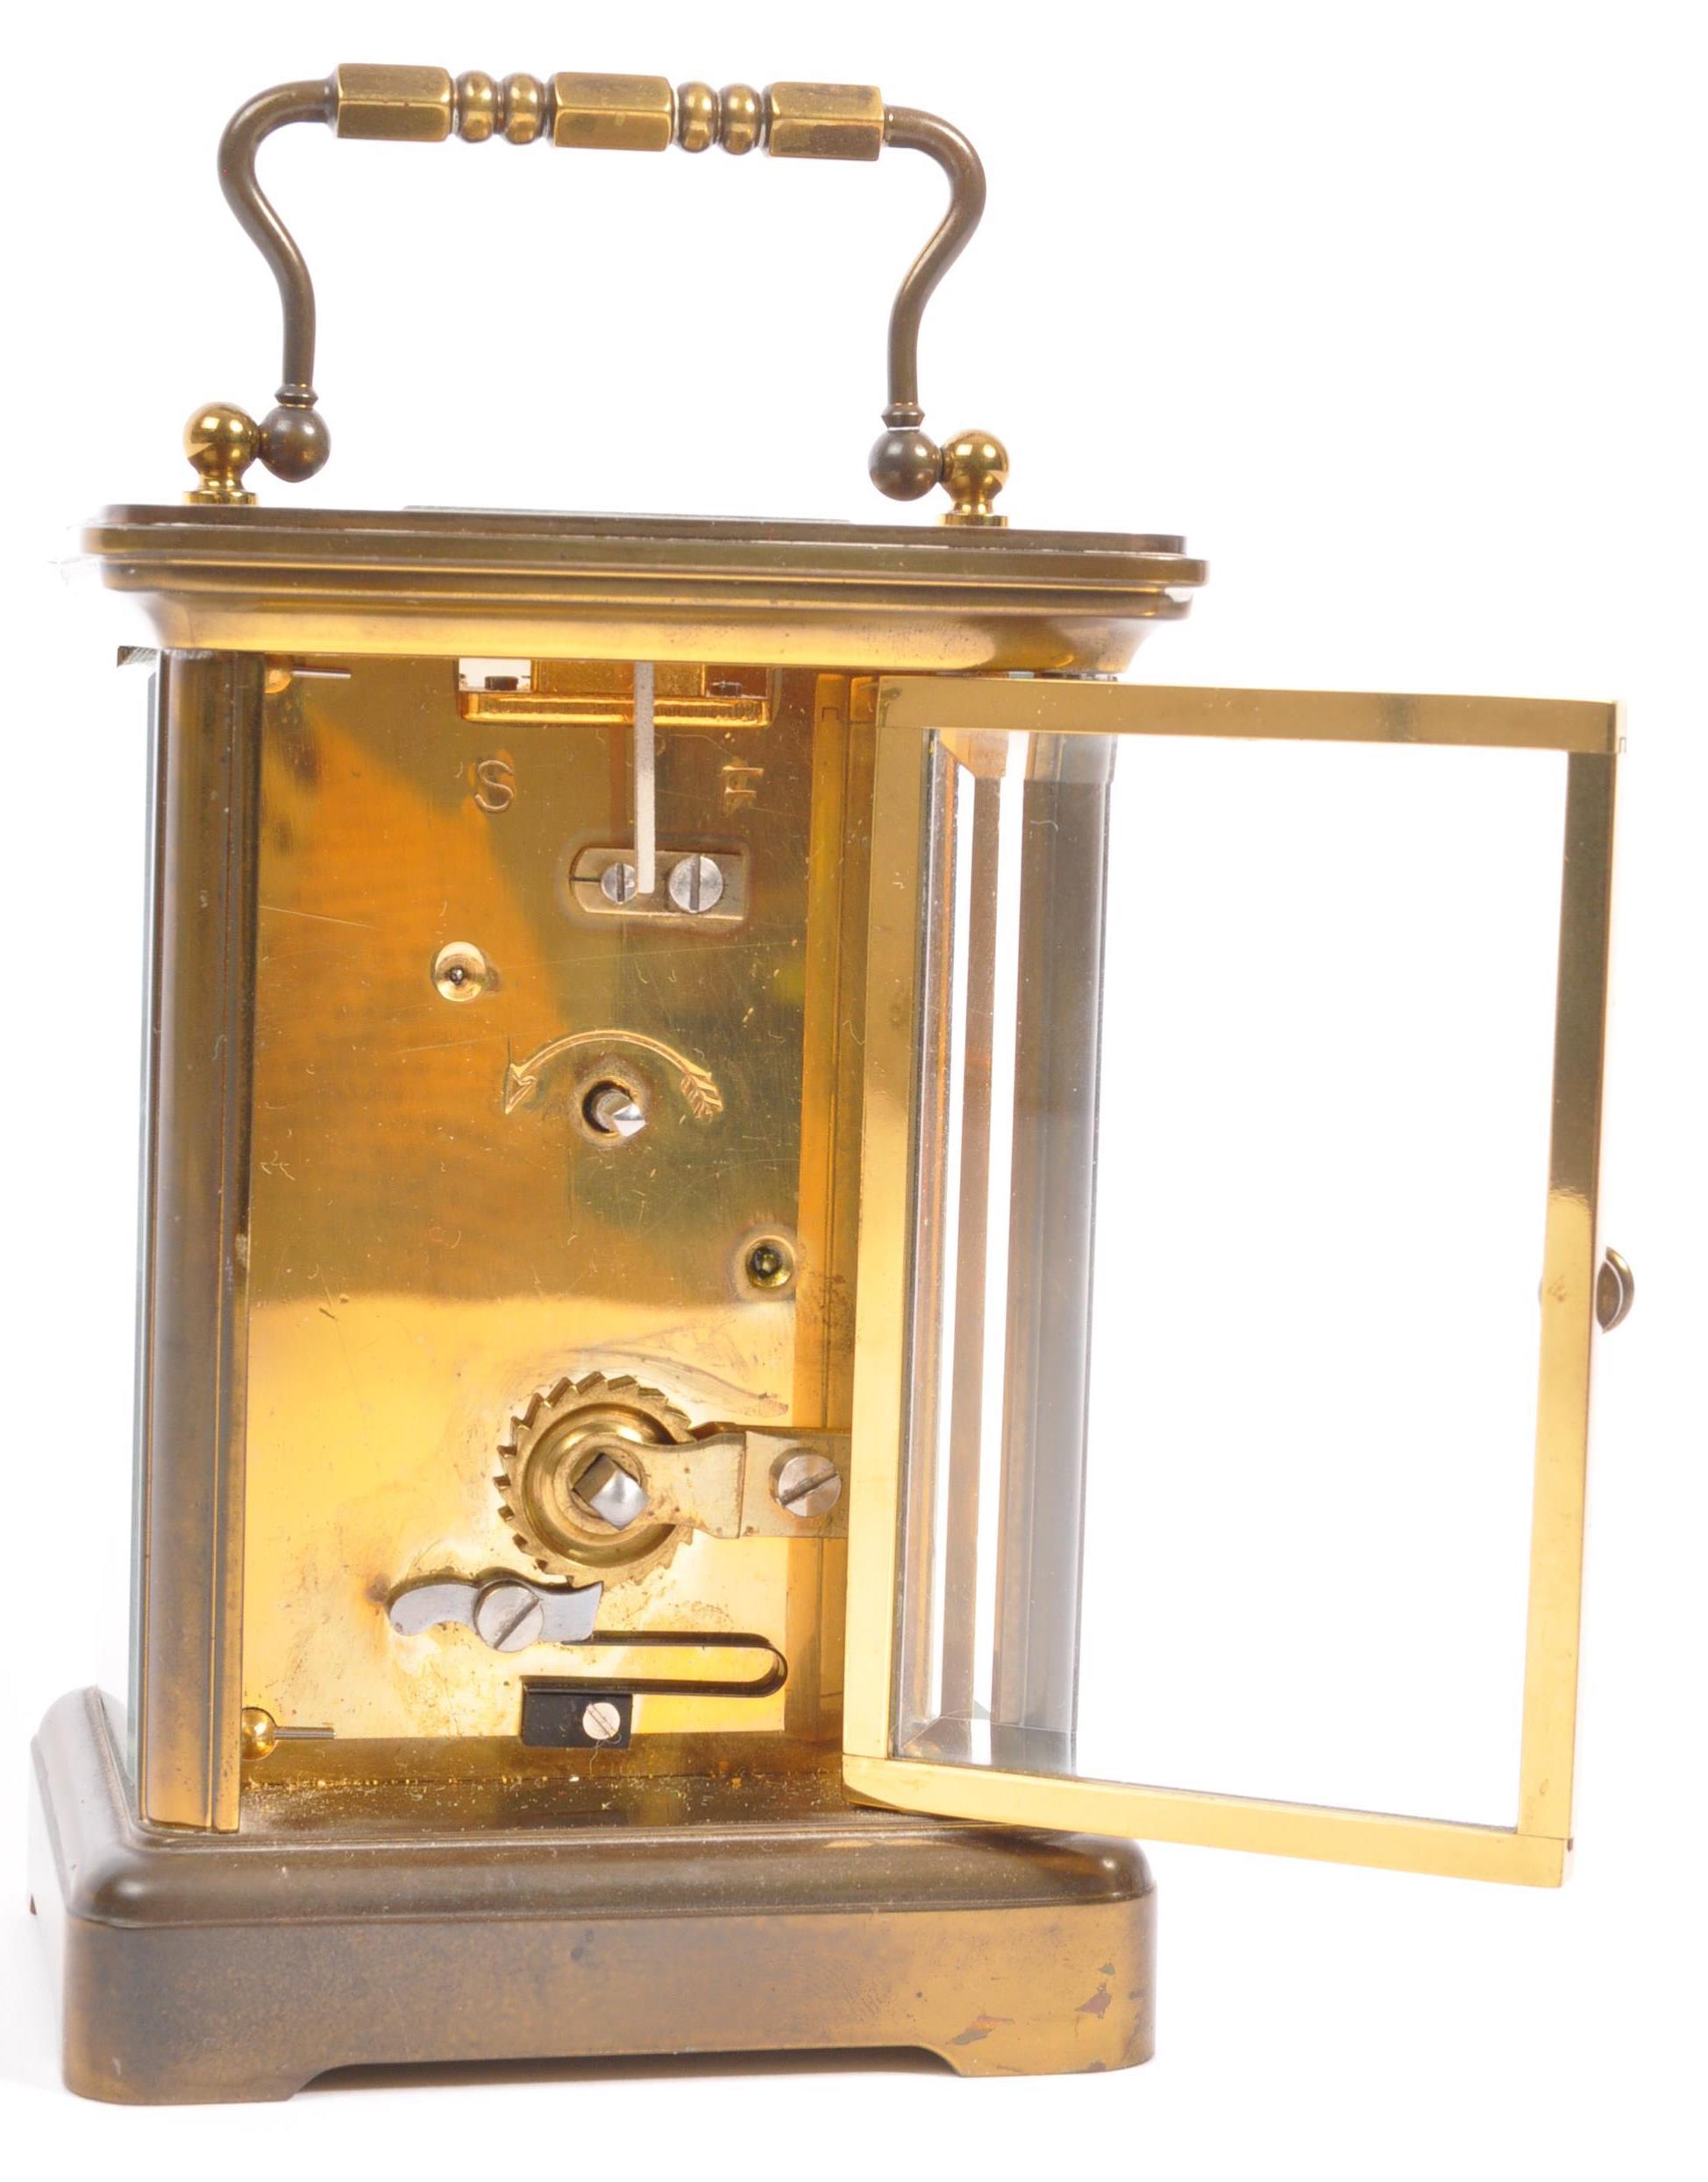 TWO EARLY 20TH CENTURY BRASS CARRIAGE CLOCK - Image 7 of 7